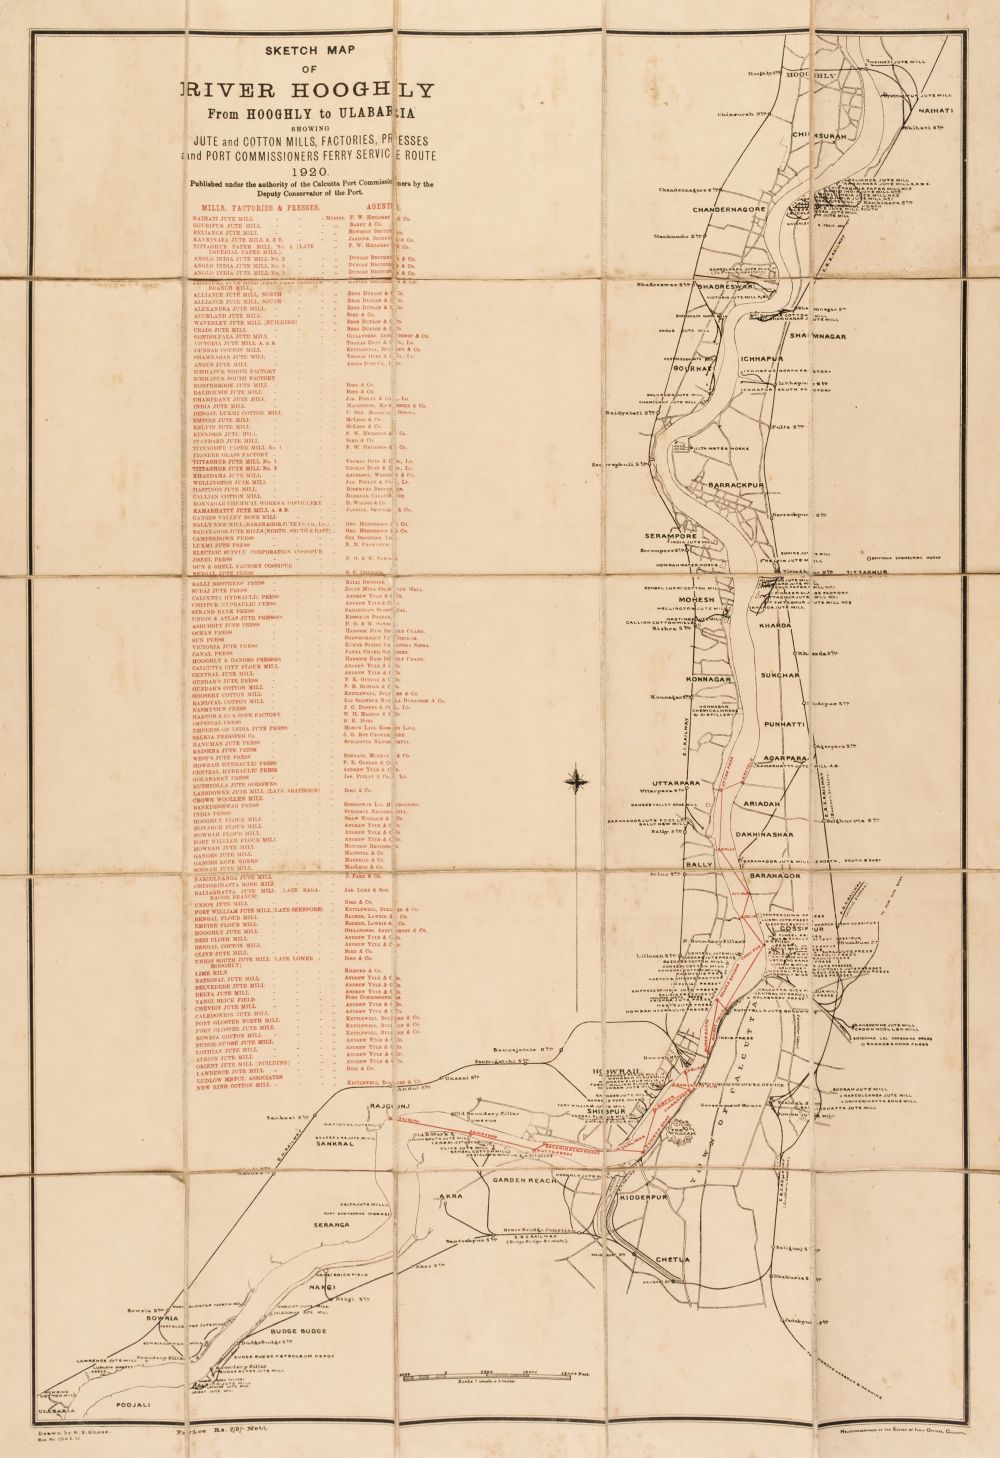 India. Ghose (R. S.), Sketch map of River Hooghly from Hooghly to Ulabaria..., 1920